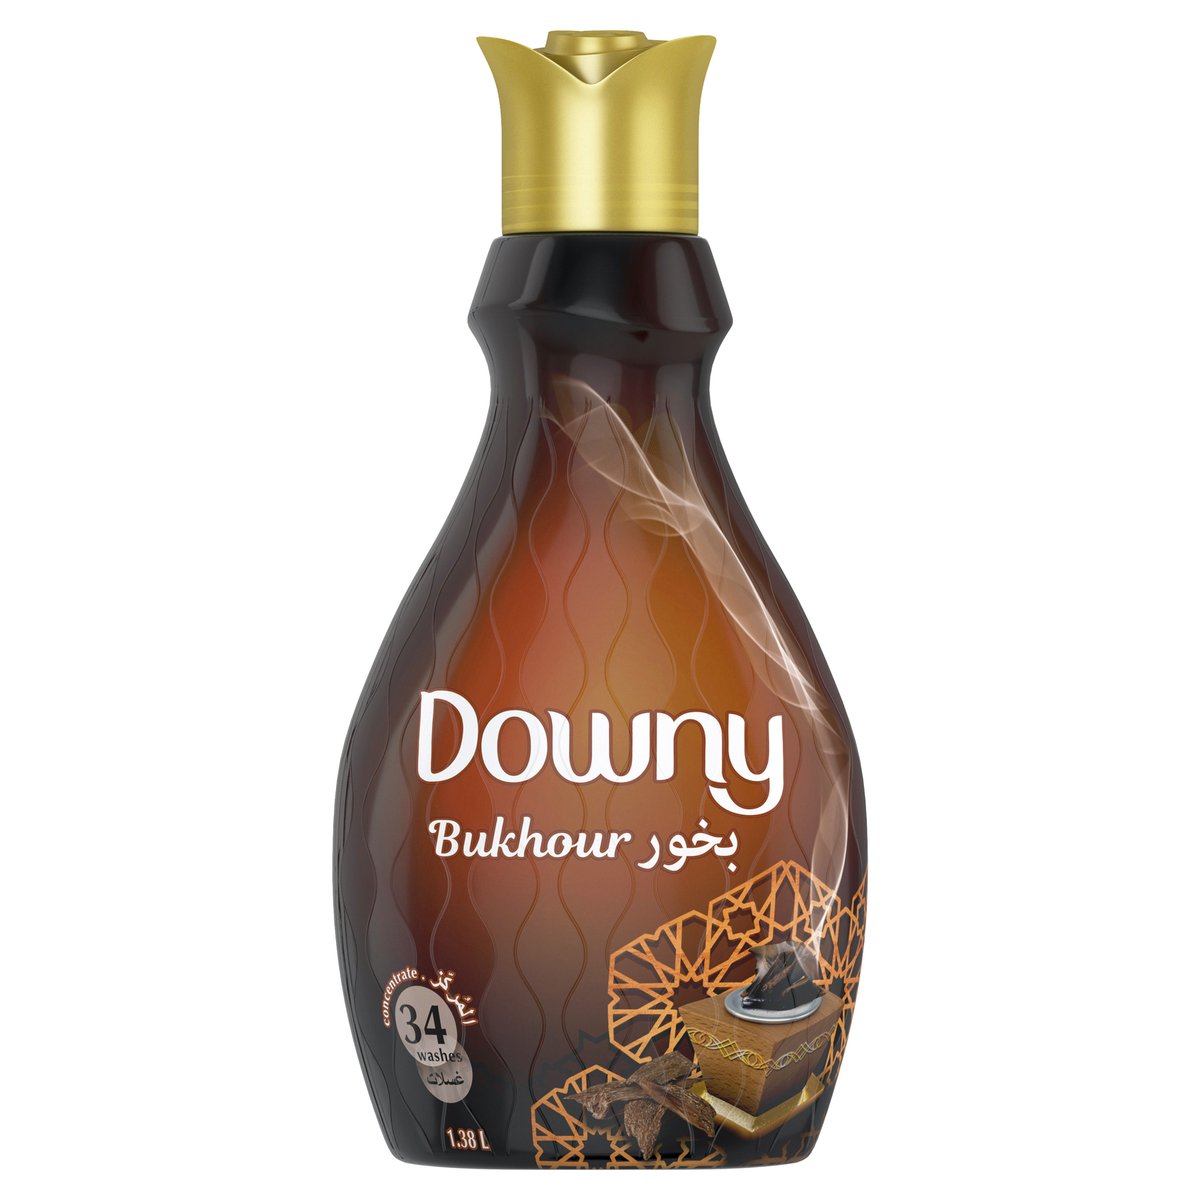 Downy Arabian Rituals Bukhour Fabric Softener For Up to 34 Washes 1.38Litre